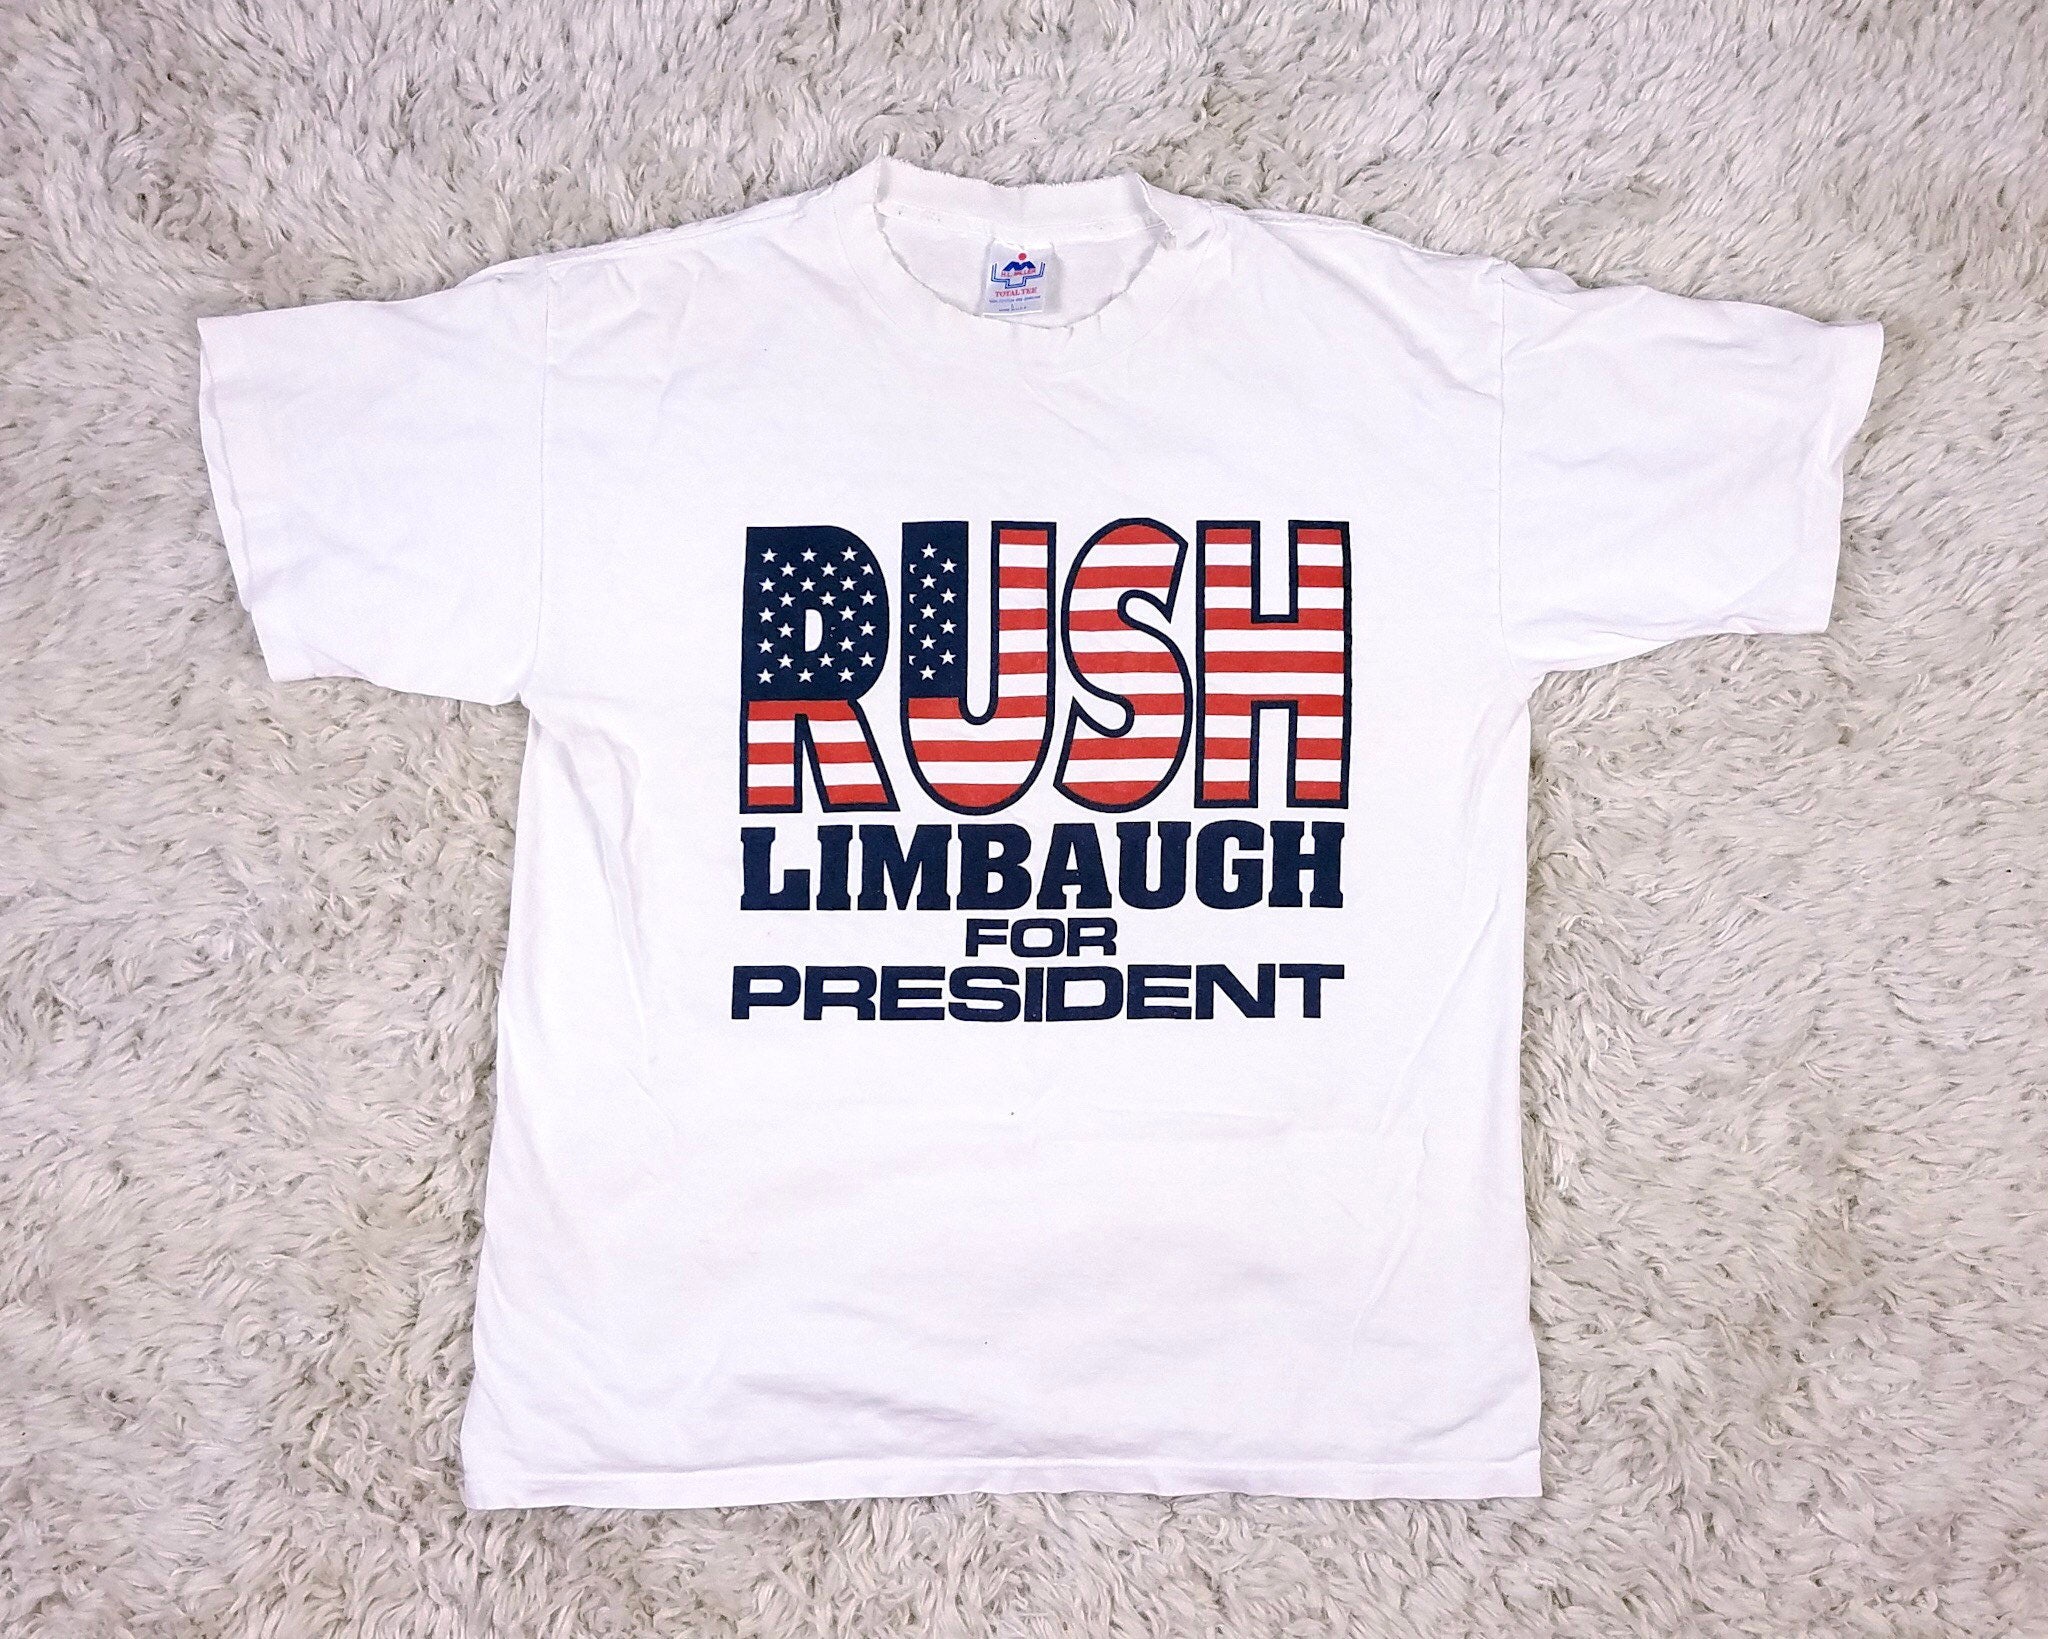 90s Vintage Rush Limbaugh For President Graphic T-Shirt, Novelty Political ...2048 x 1639